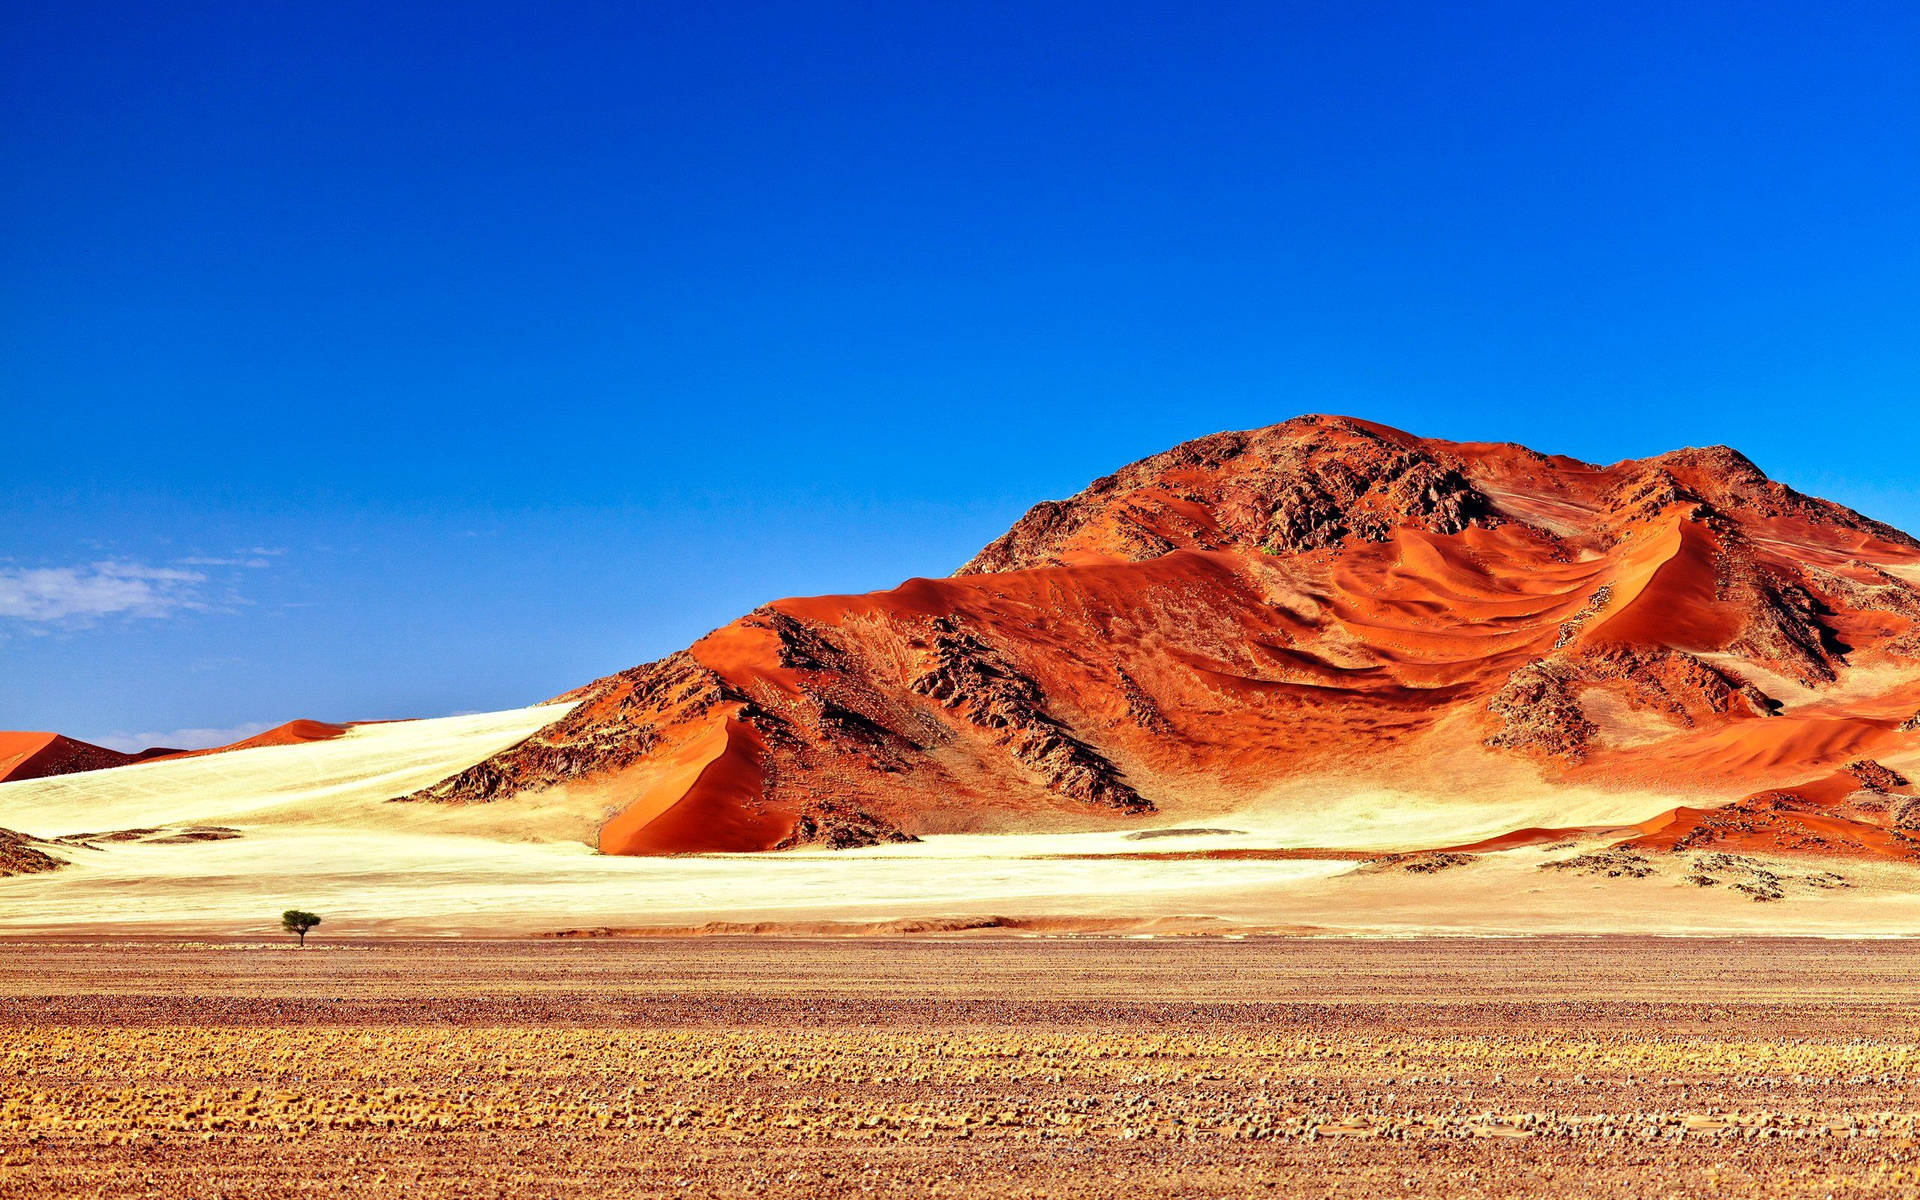 The stunning view of a Red Desert Mountain Wallpaper